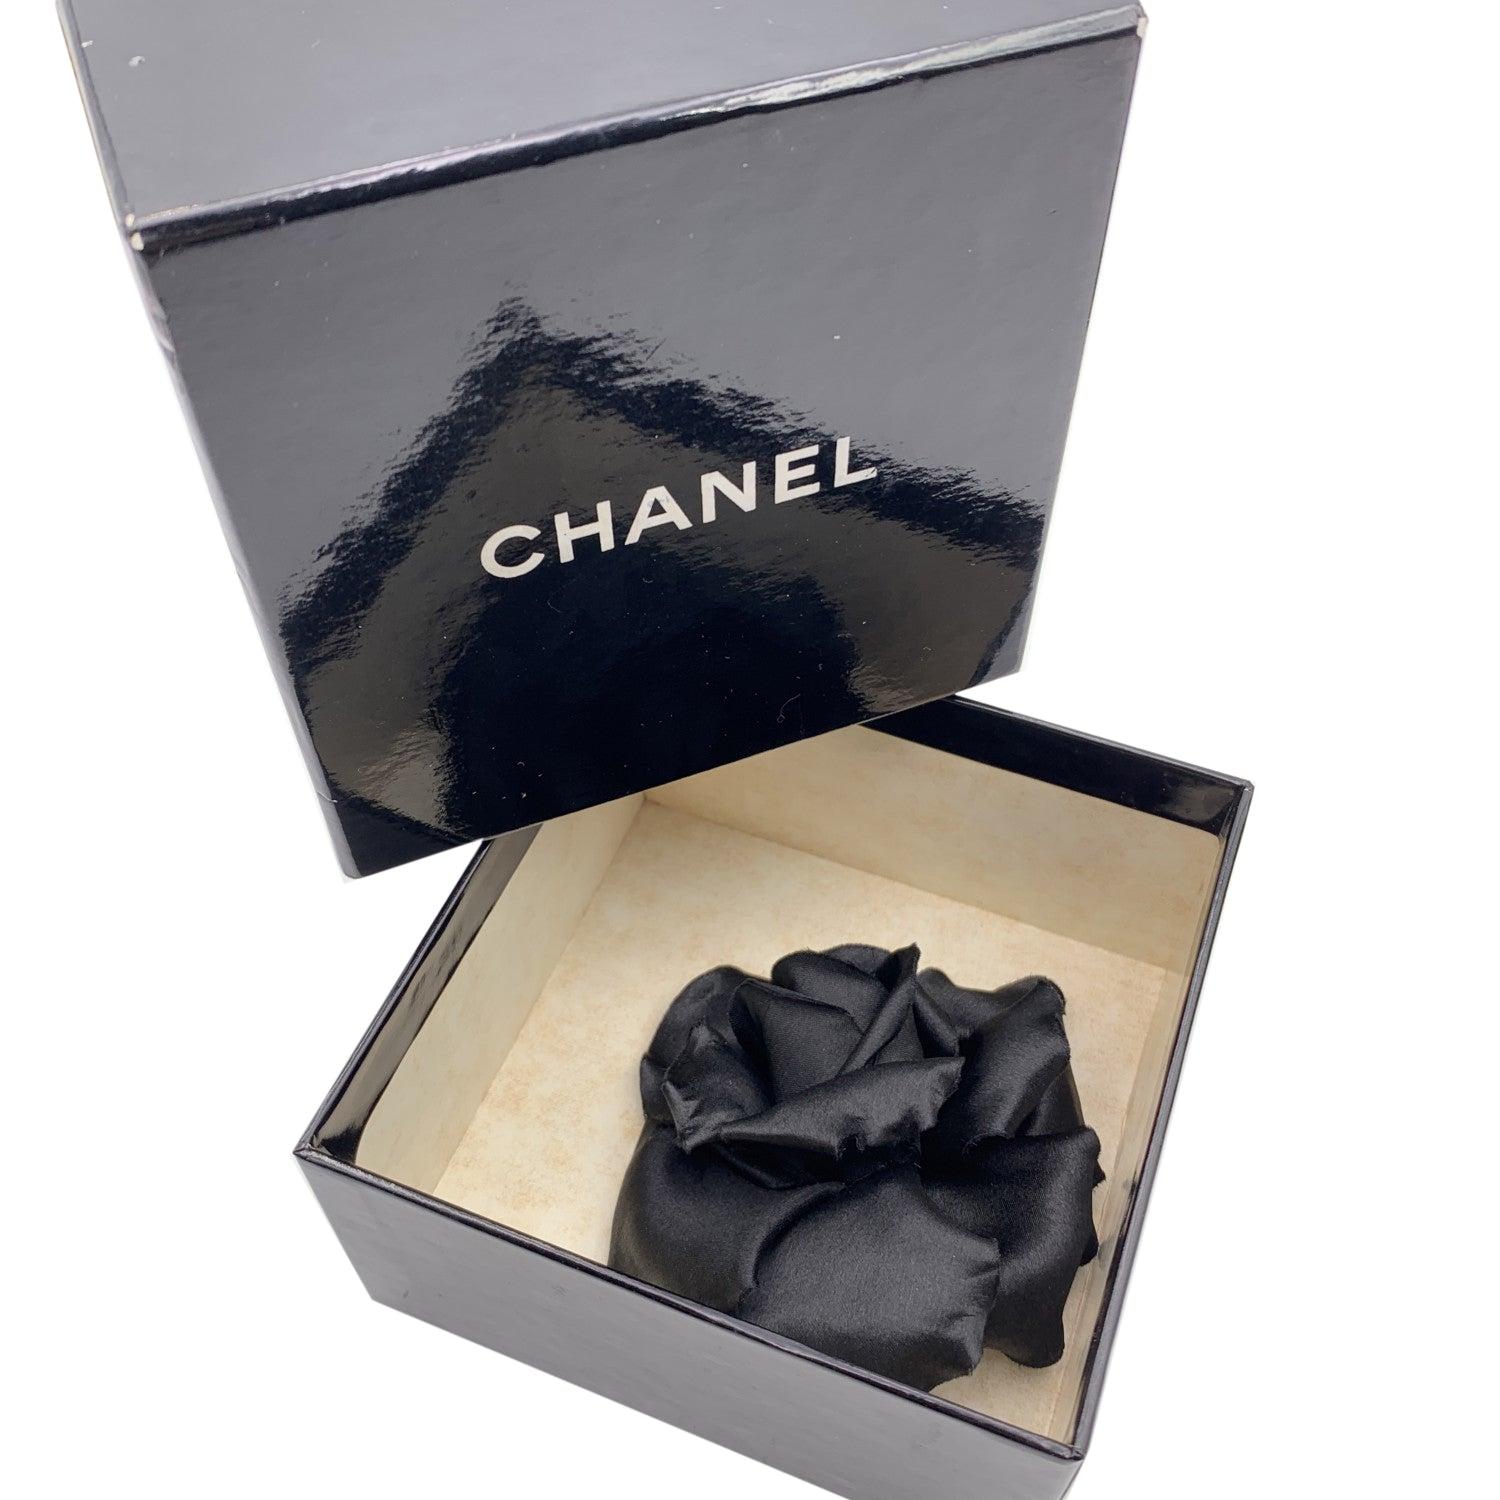 Chanel Vintage black Rose Flower Pin Brooch. Black satin petals. Safety pin closure. Measurements: diameter: 3.5 inches - 8.9 cm. 'CHANEL - CC - Made in France' oval tab on the back Condition A - EXCELLENT Gently used. Chanel box included. Please